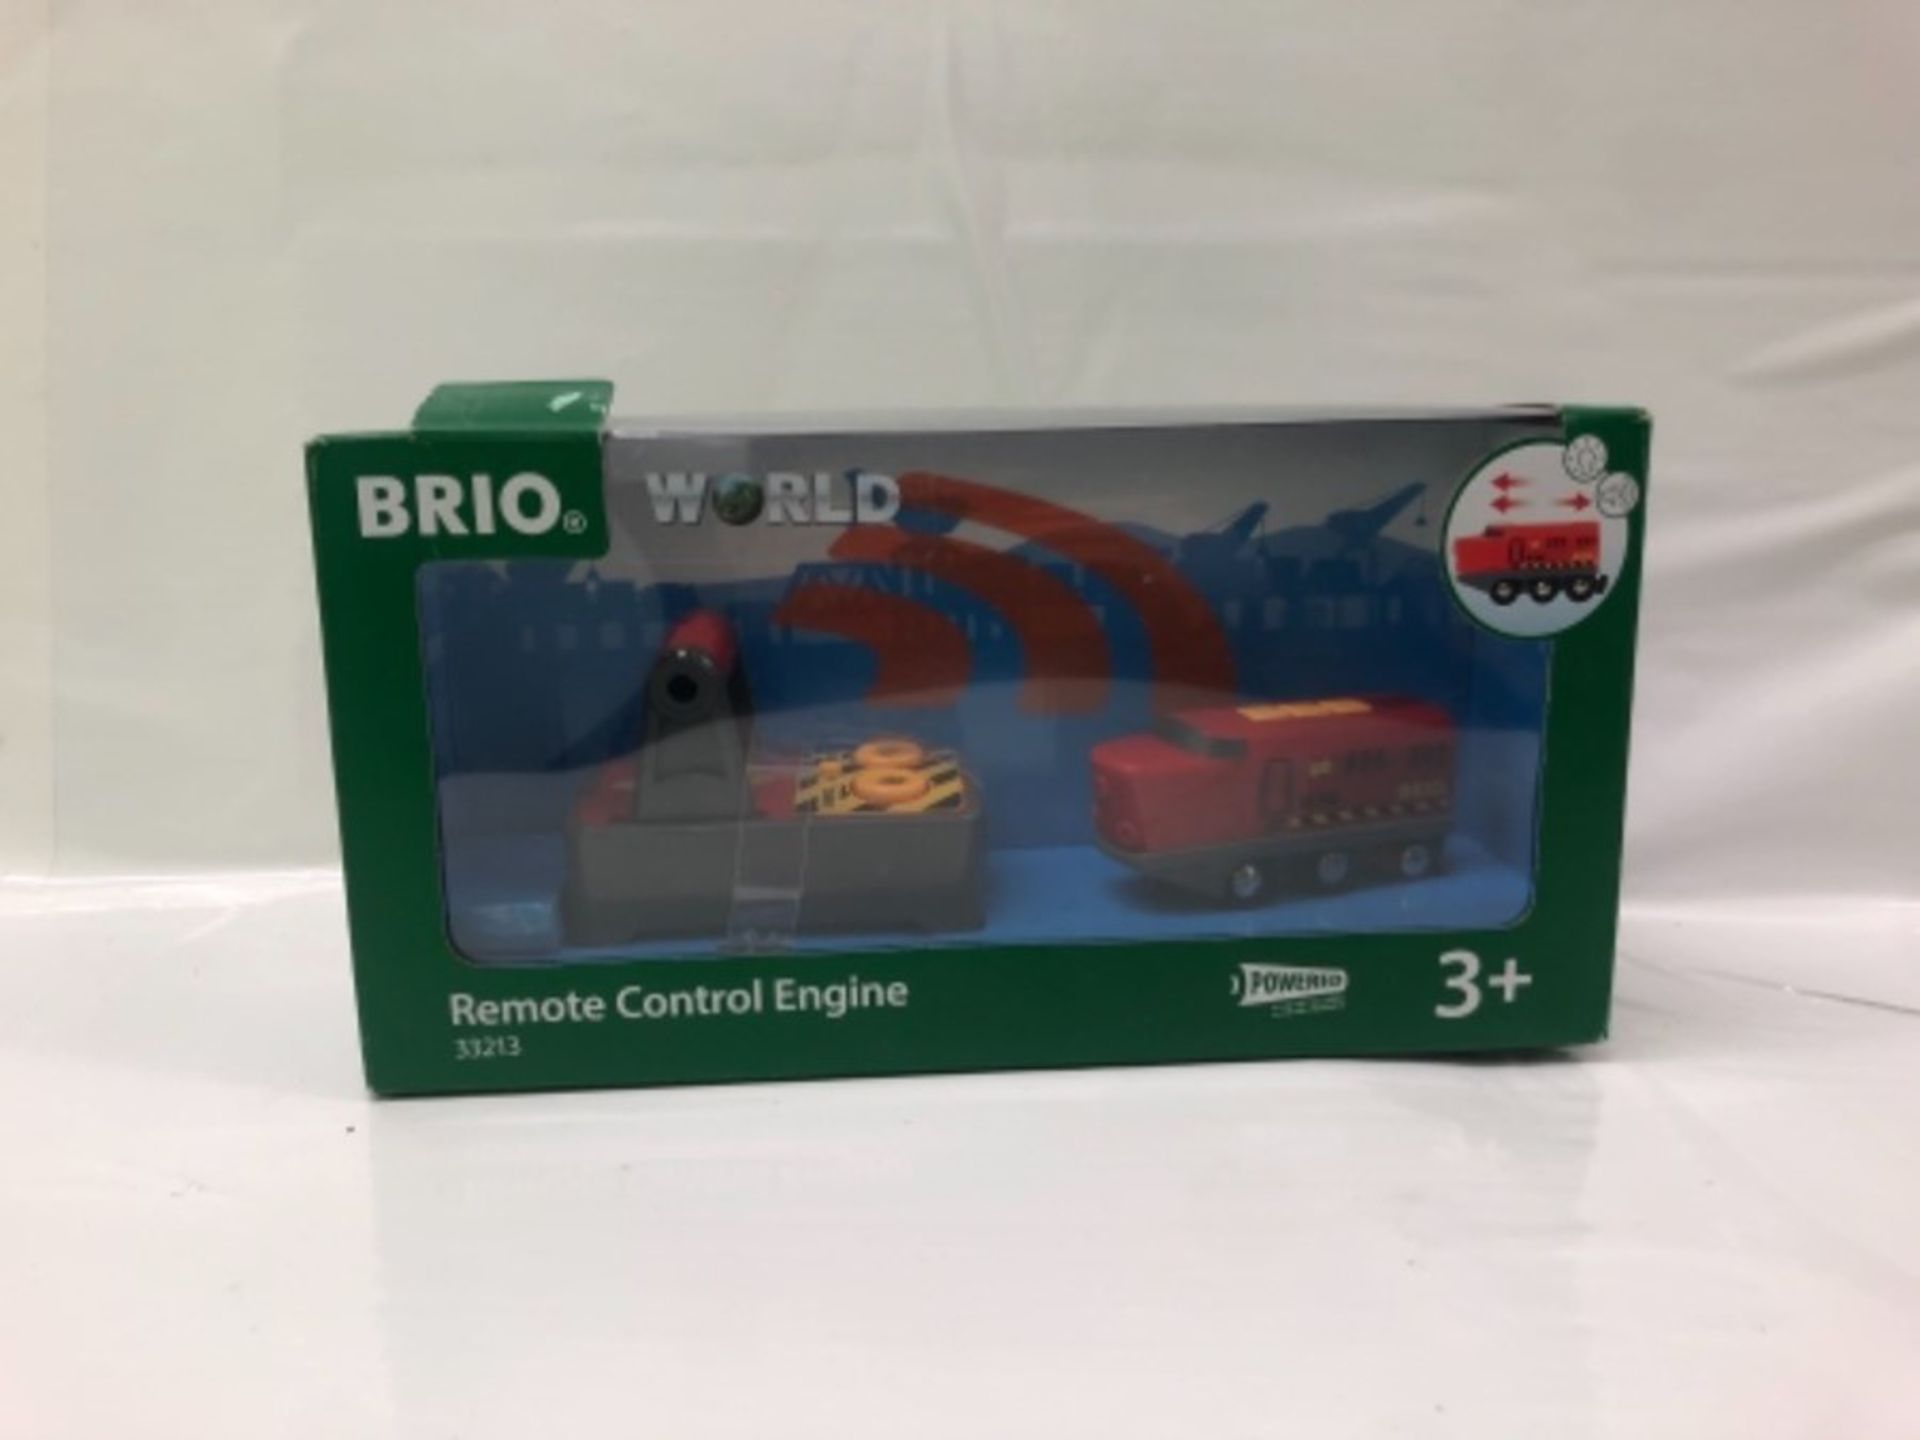 BRIO World Remote Control Engine for Kids Age 3 Years and Up, Compatible with all BRIO - Image 2 of 3